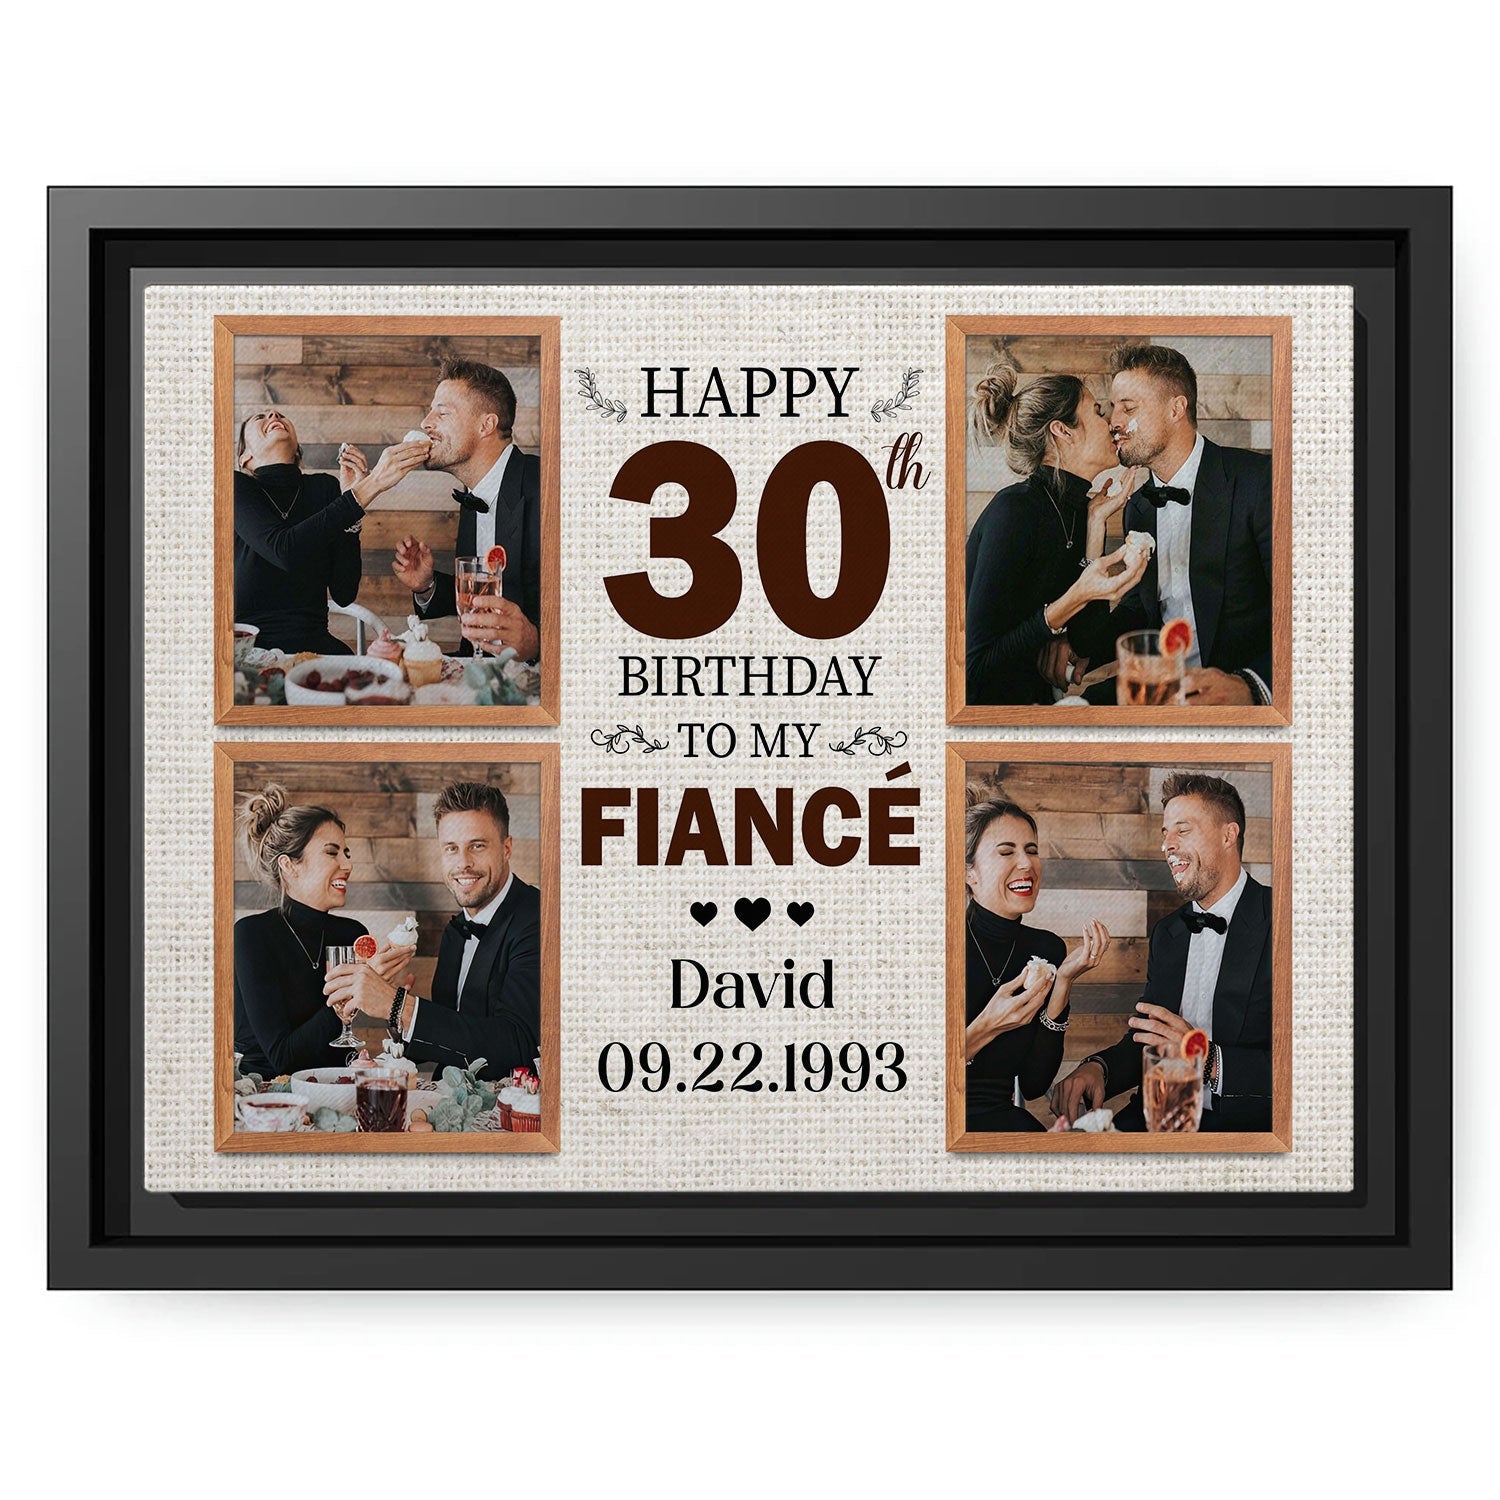 Happy 30th Birthday To My Fiance - Personalized 30th Birthday gift For Fiance - Custom Canvas Print - MyMindfulGifts